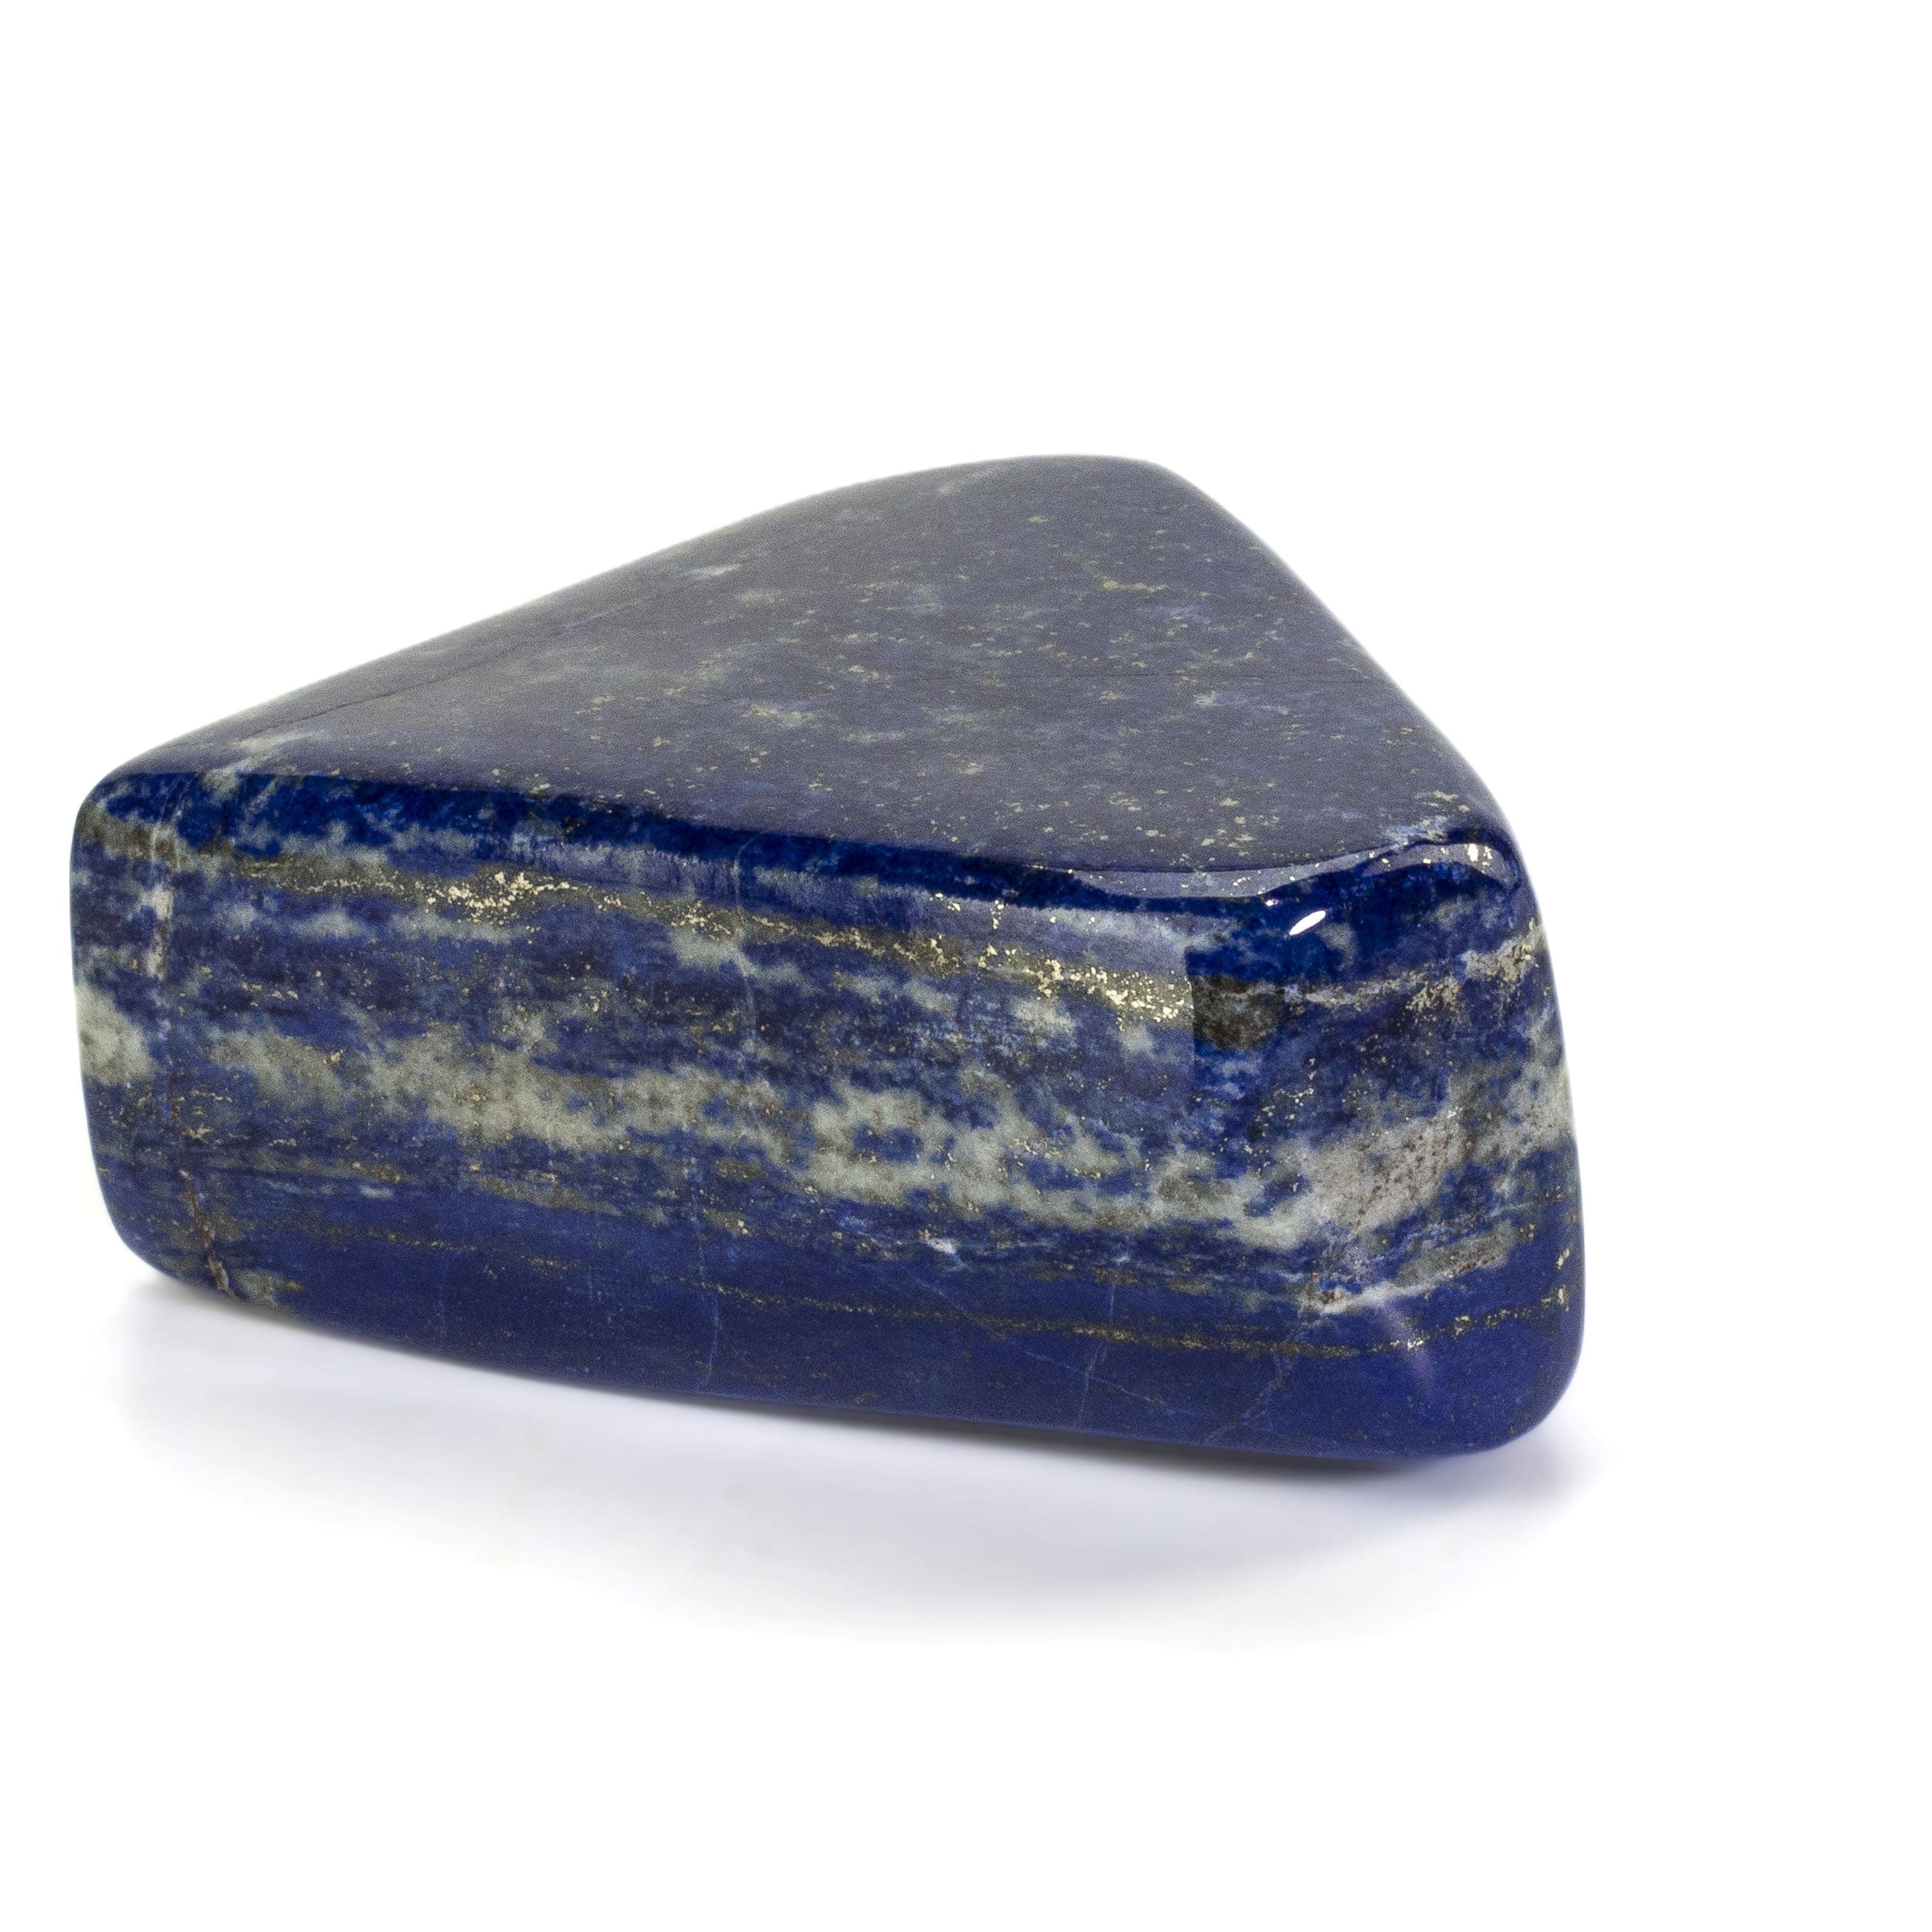 Kalifano Lapis Lapis Lazuil Freeform from Afghanistan - 400 g / 0.9 lbs LP500.006